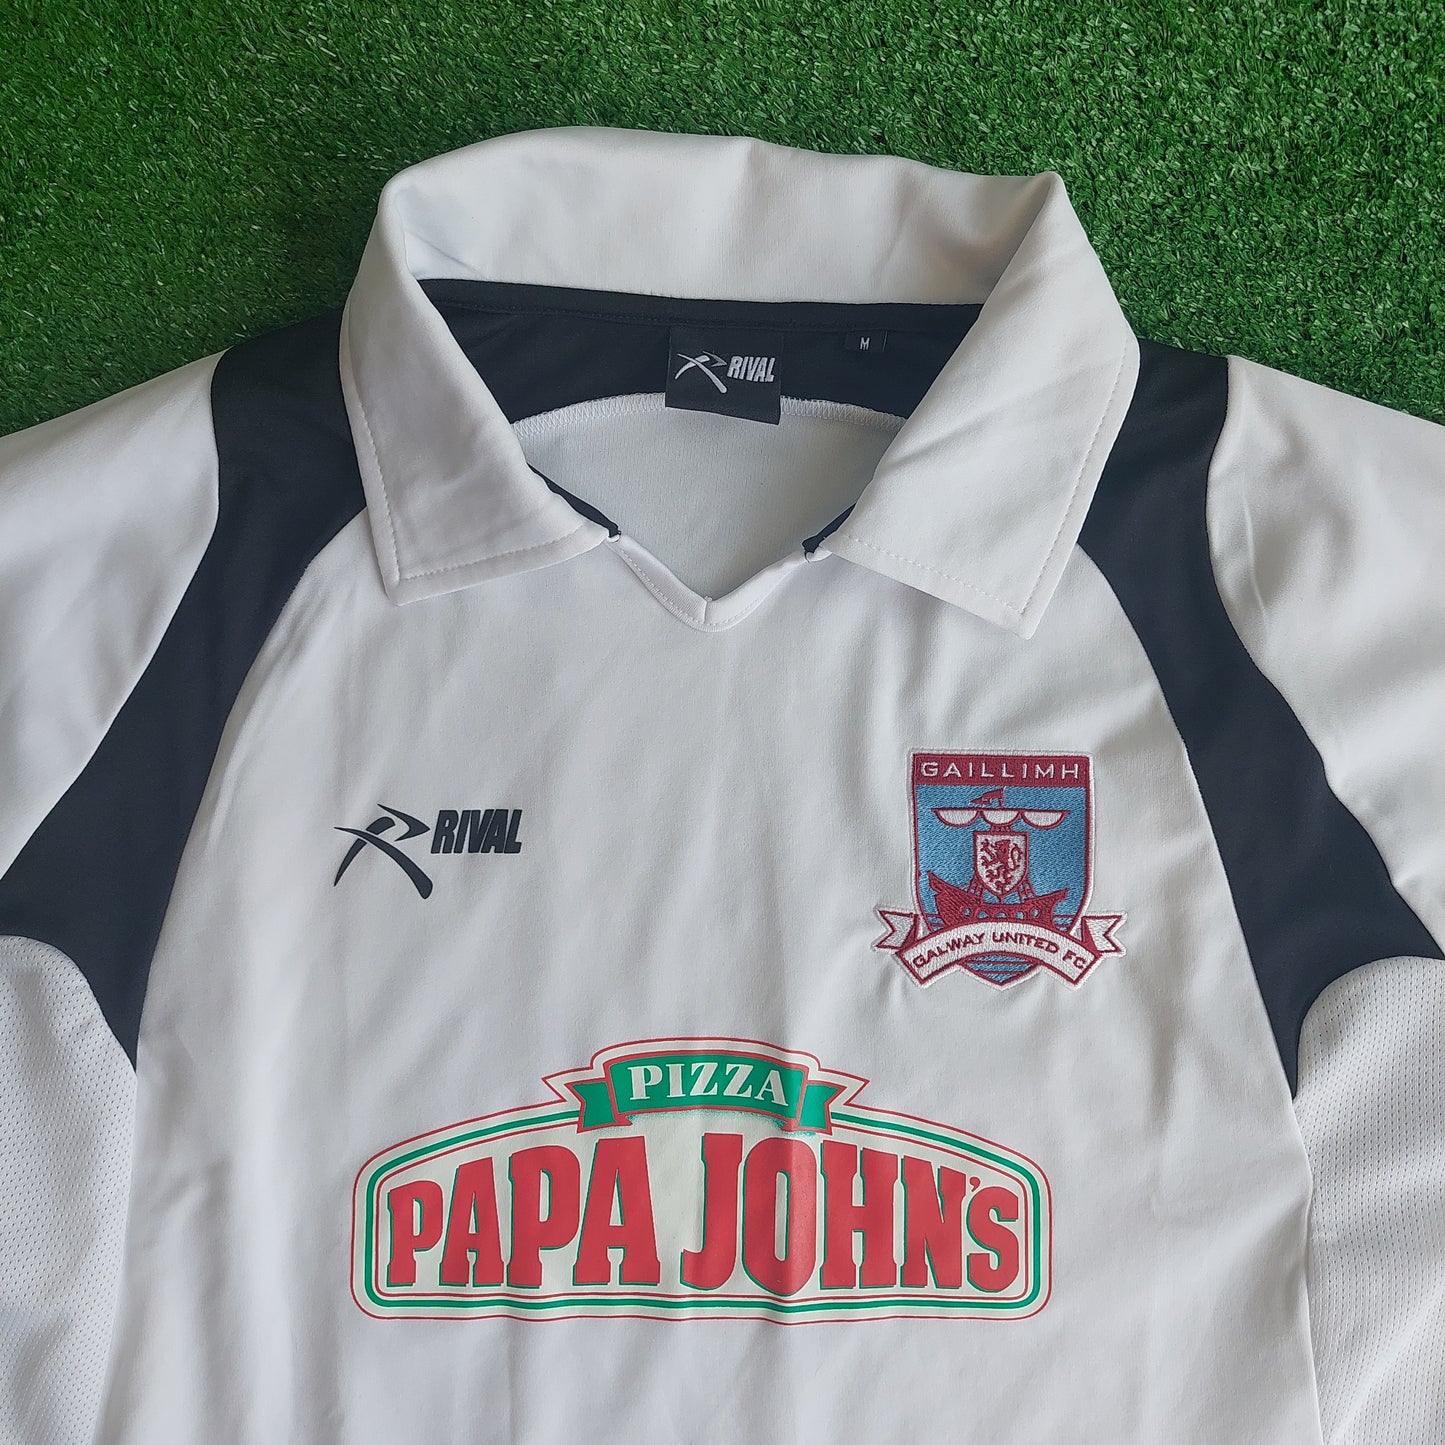 Galway United 2011/12 Away Shirt (Excellent) - Size M